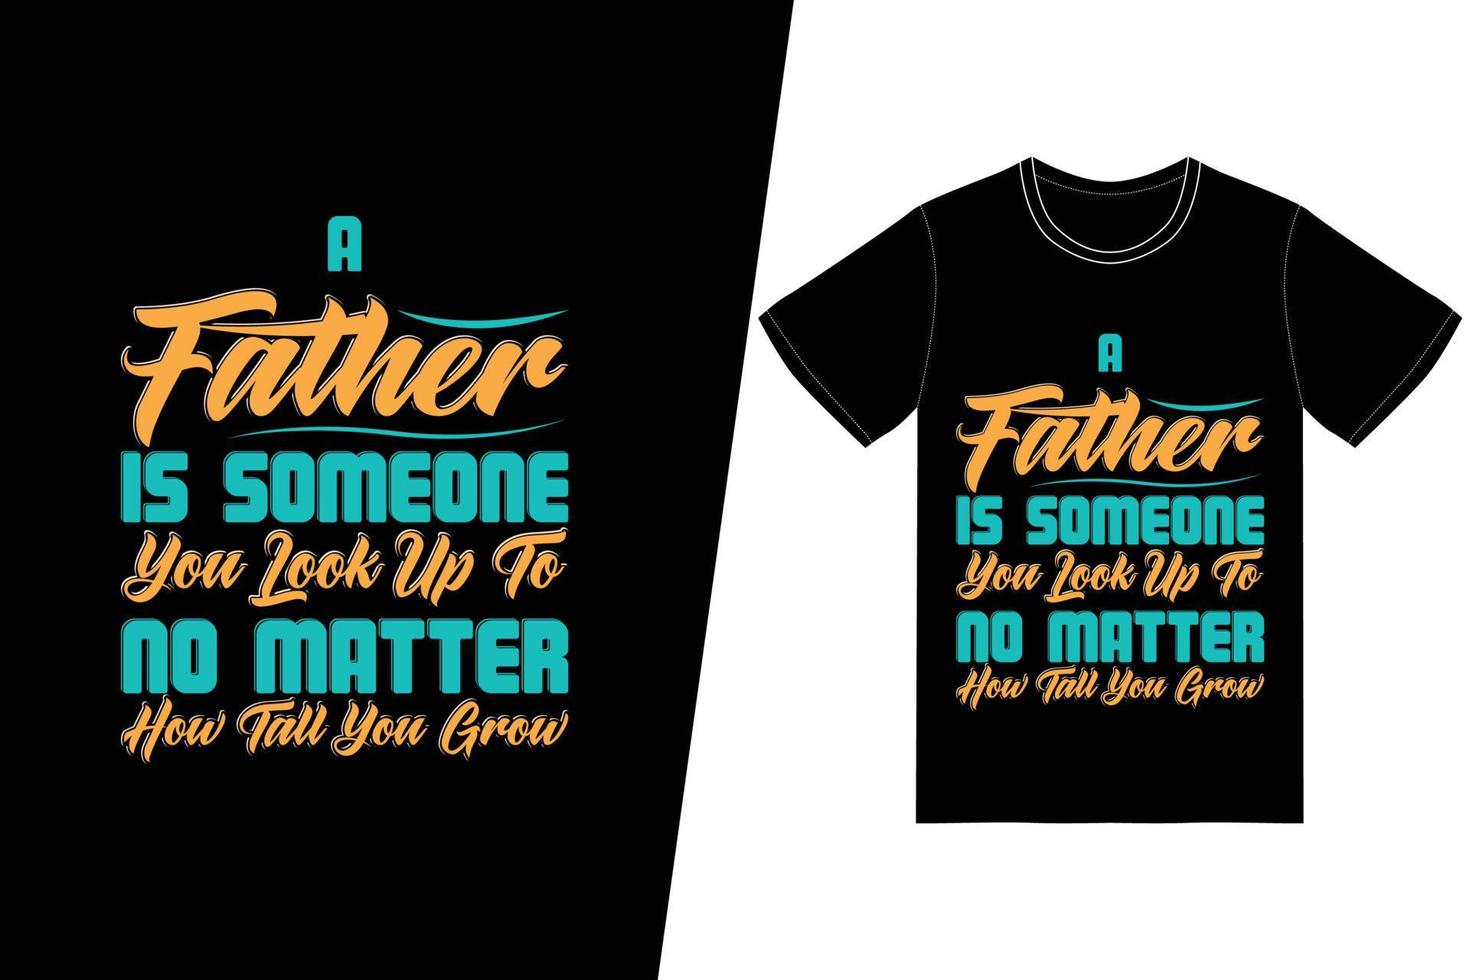 A father is someone you look up to no matter how tall you grow t-shirt design. Fathers Day t-shirt design vector. For t-shirt print and other uses. vector